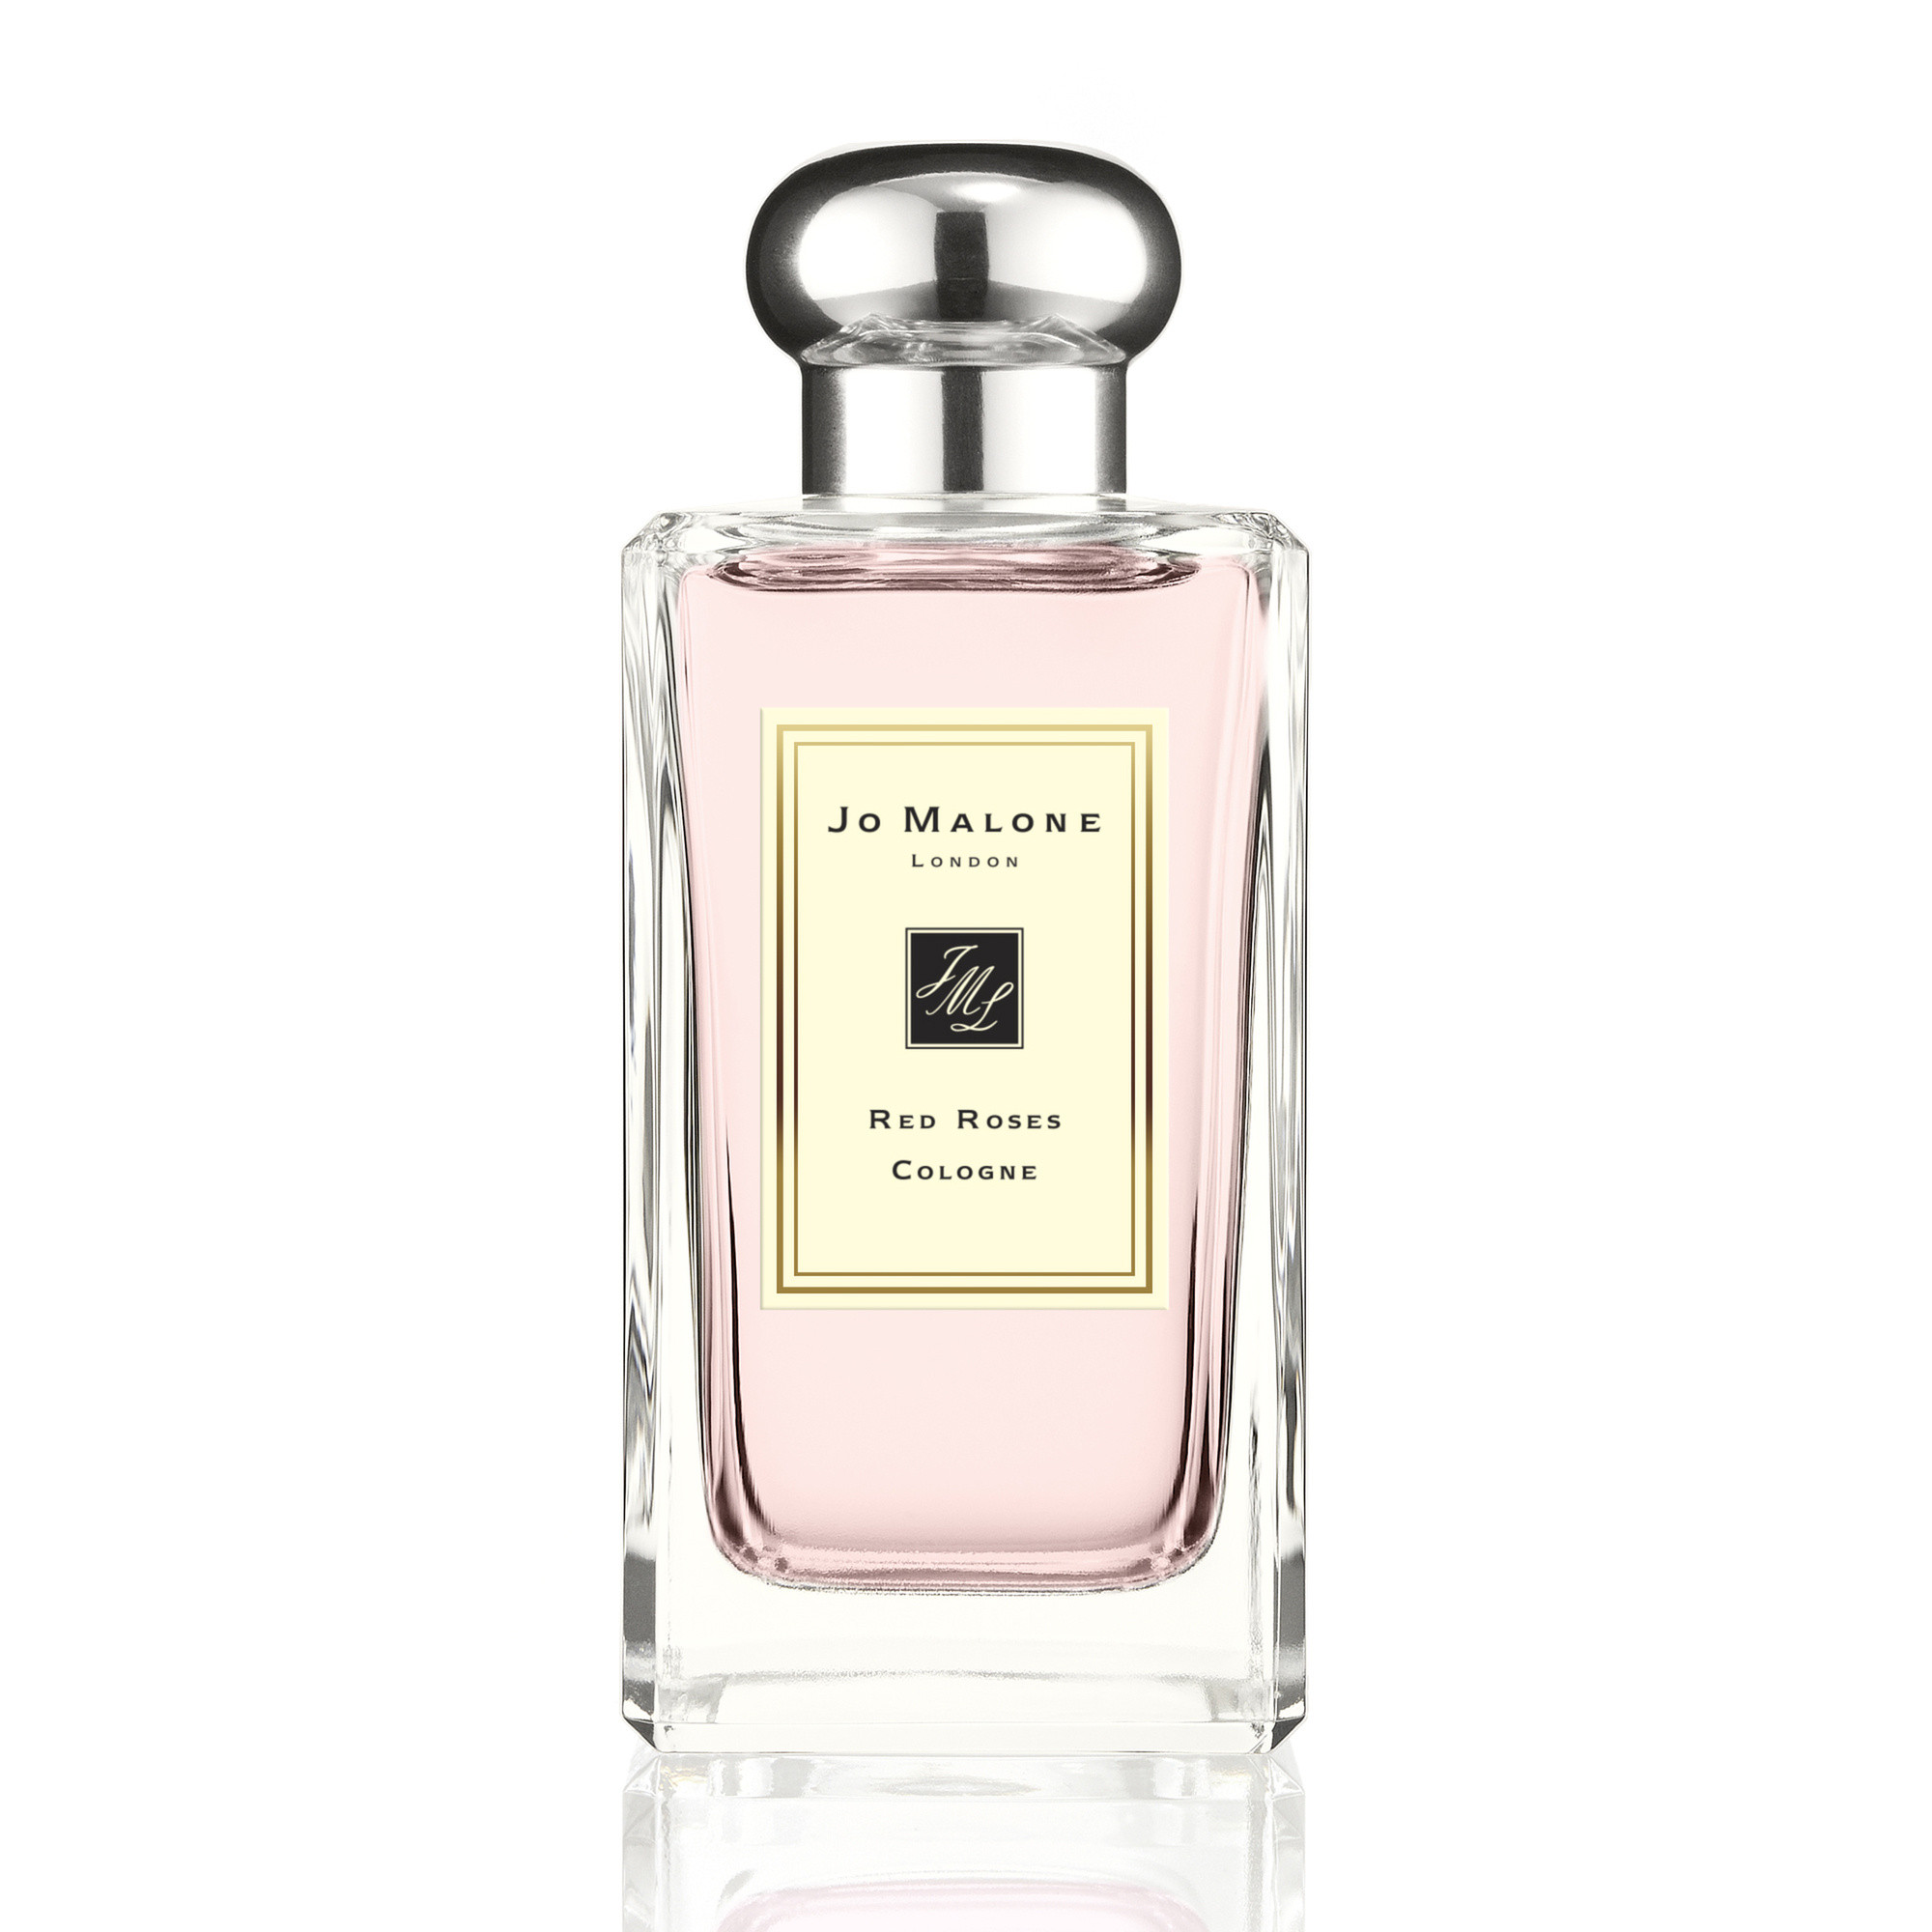 Jo Malone London red roses cologne 100 ml, Beige, large